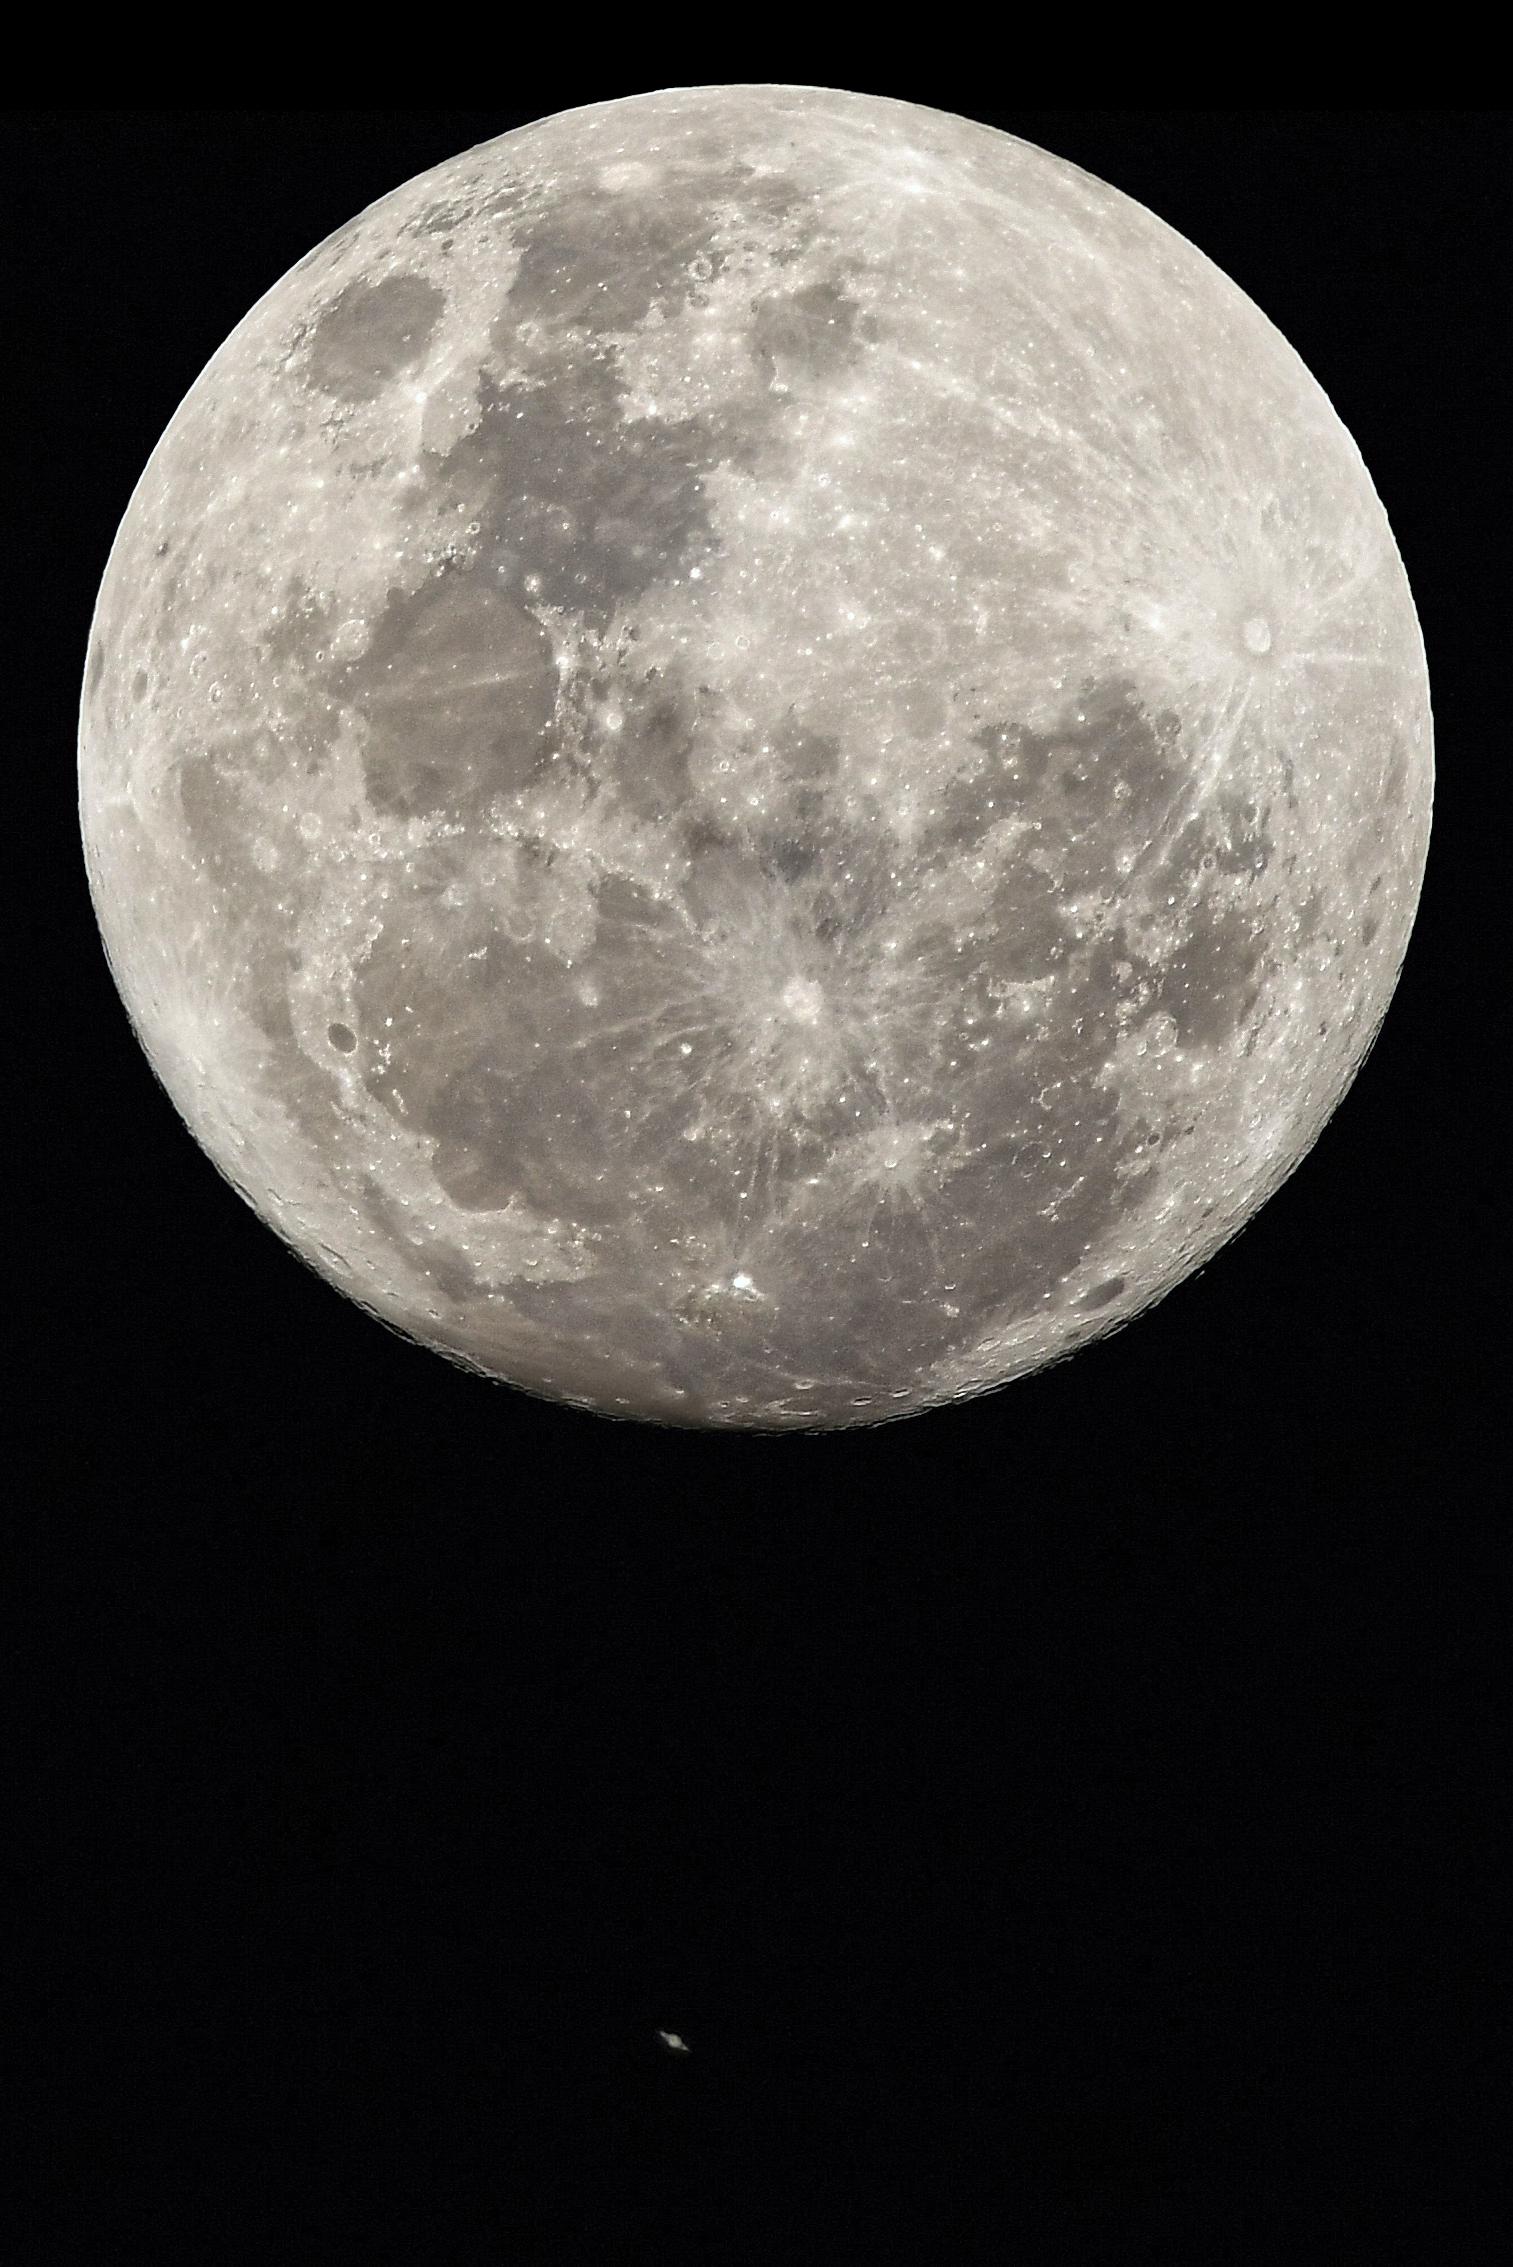 This picture of the super moon also includes Saturn!